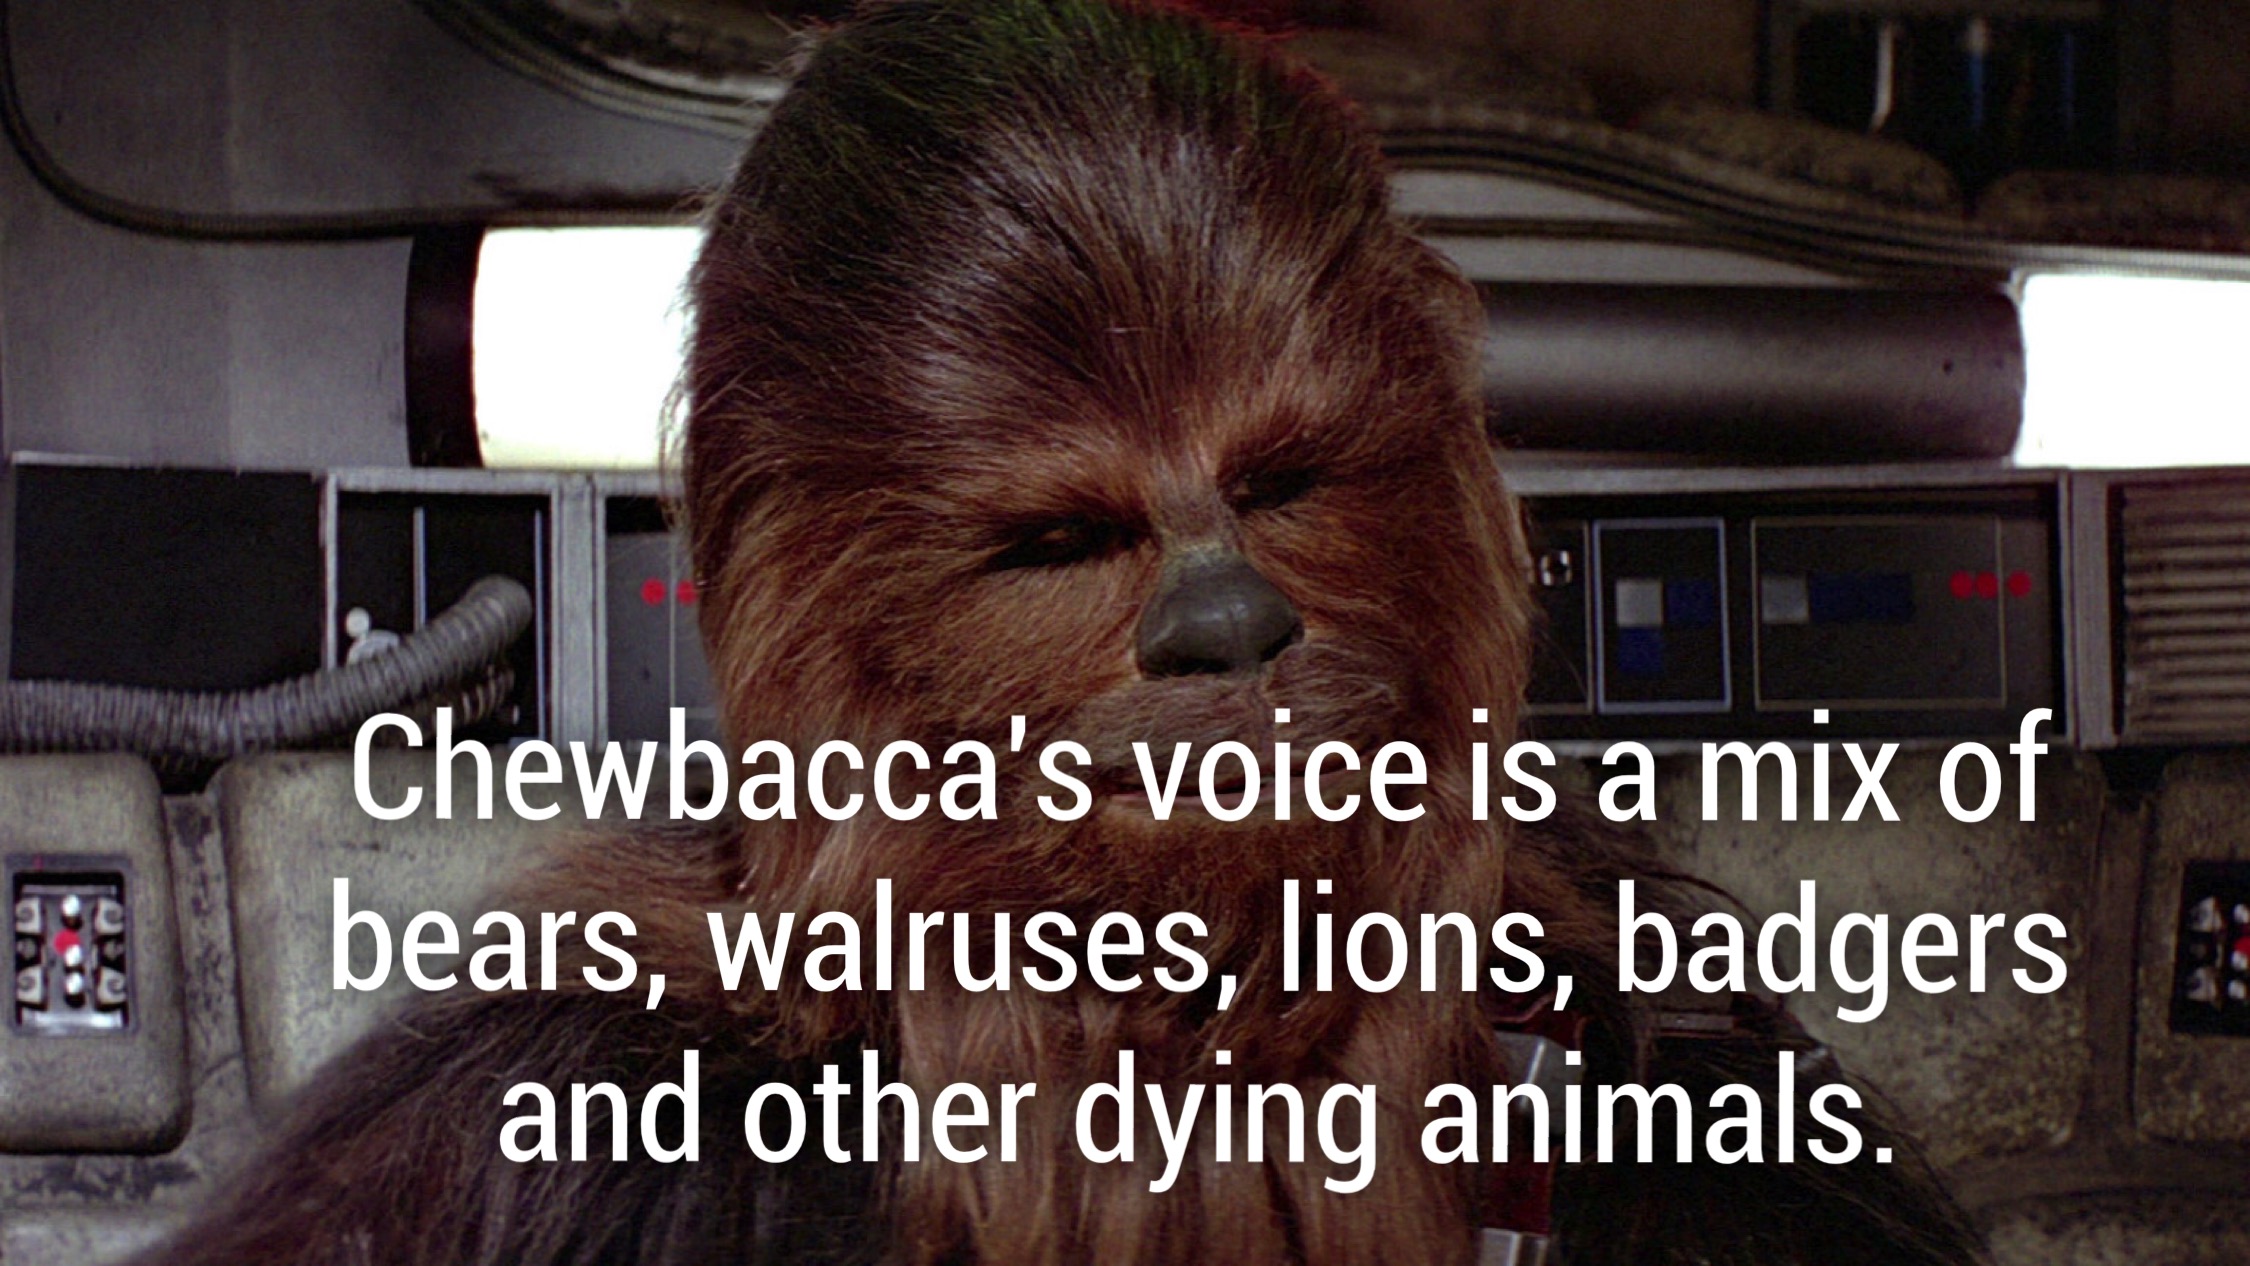 star wars a new hope chewbacca - Chewbacca's voice is a mix of bears, walruses, lions, badgers and other dying animals.